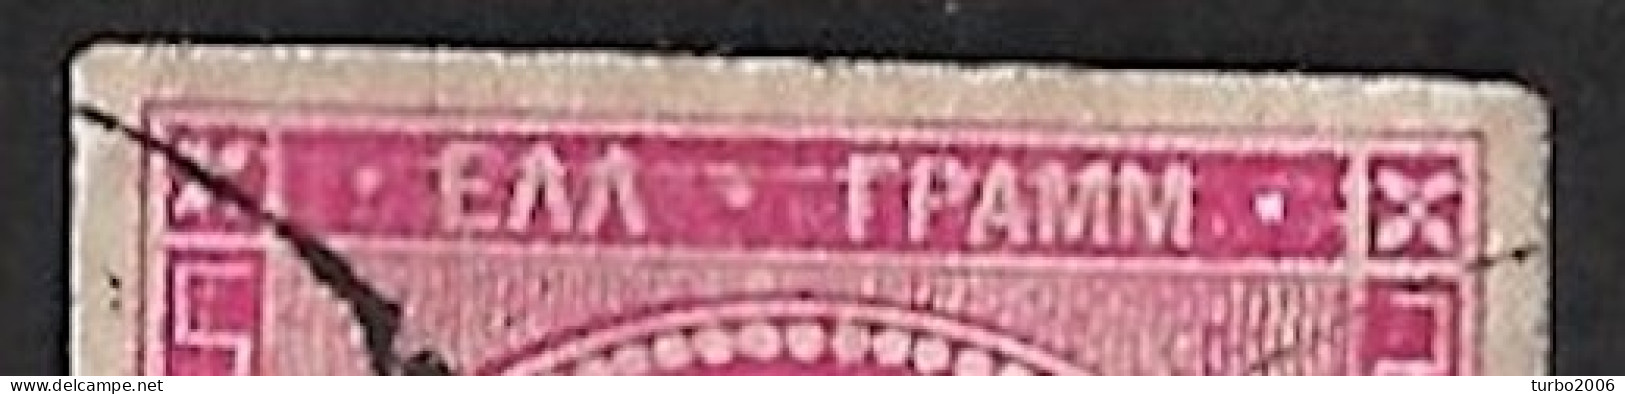 Plateflaw 20F6 (horizontal Line) In GREECE 1880-86 Large Hermes Head Athens Issue 20 L Aniline Red Vl. 72 A / H 59 II A - Plaatfouten En Curiosa